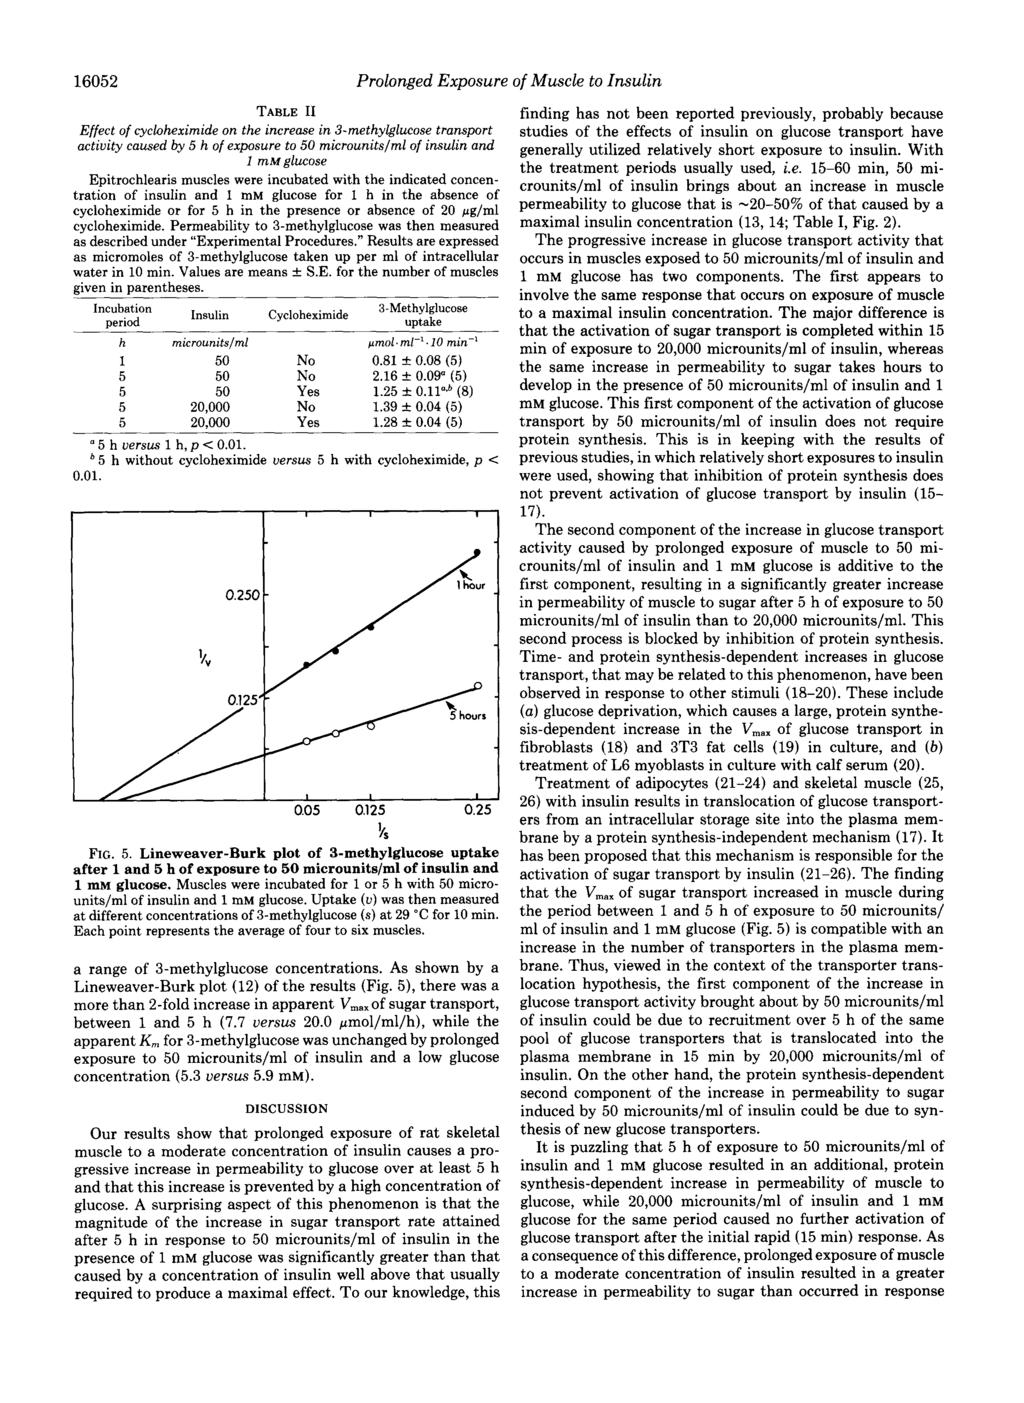 16052 Prolonged Exposure of Muscle to nsulin TABLE 1 Effect of cycloheximide on the increase in 3-methylglucose transport activity caused by 5 h of exposure to 50 microunitslml of insulin and 1